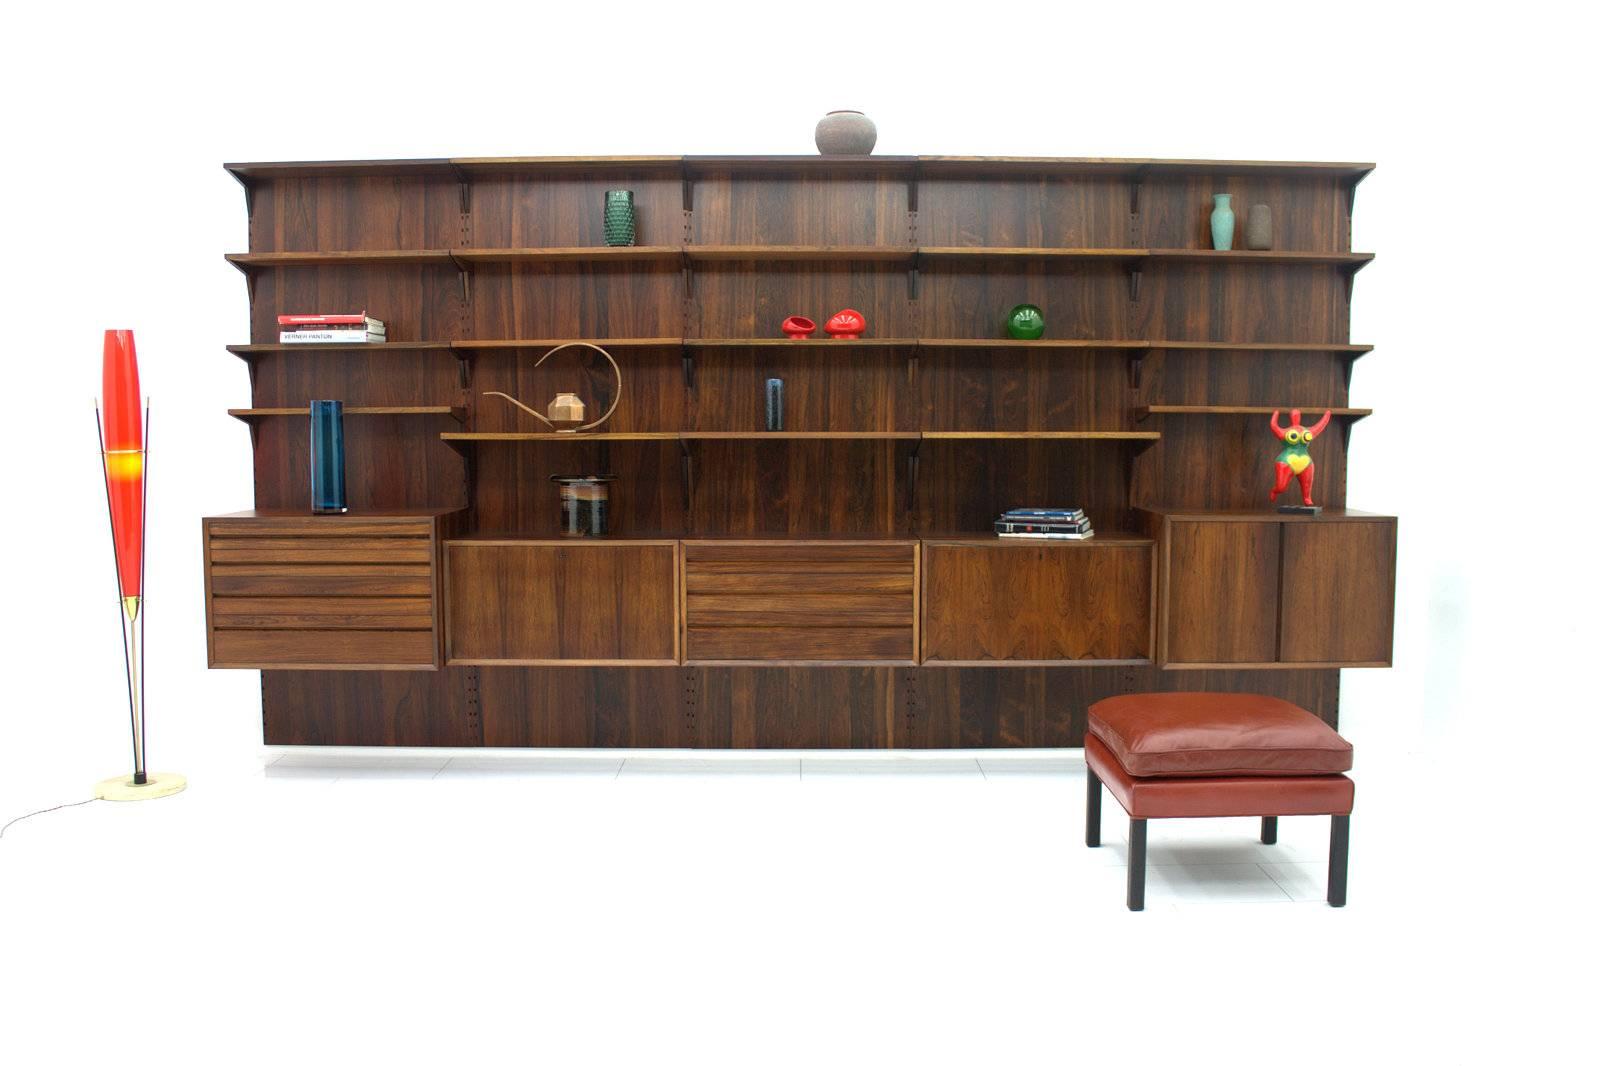 Large wall system in rosewood by Poul Cadovius, Denmark, 1960s.
Excellent restored condition.

Measurements: W 400 cm, H 215 cm, D 46 cm.

Worldwide shipping.